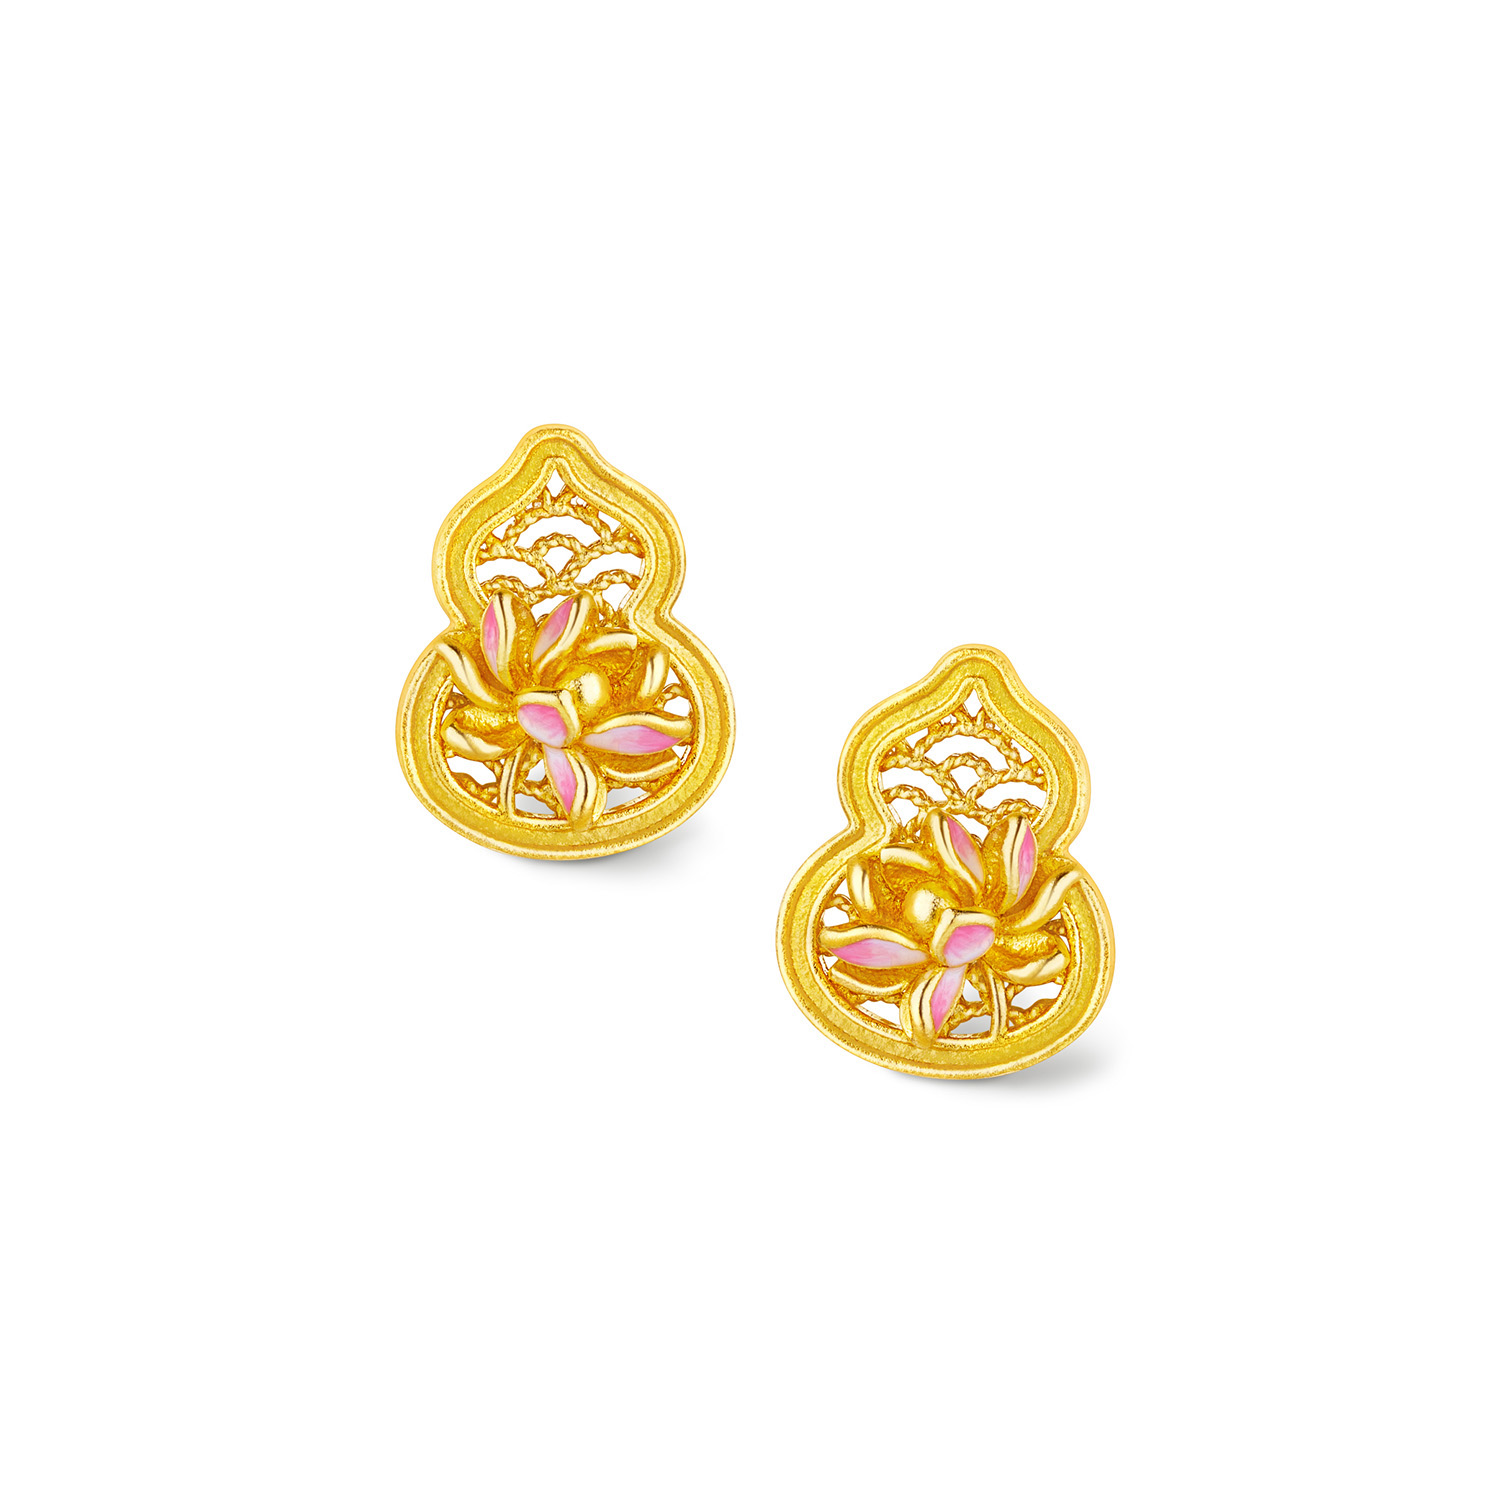 Heirloom Fortune - Charm of Song Dynasty Collection "Floral Gourd" Gold Earrings